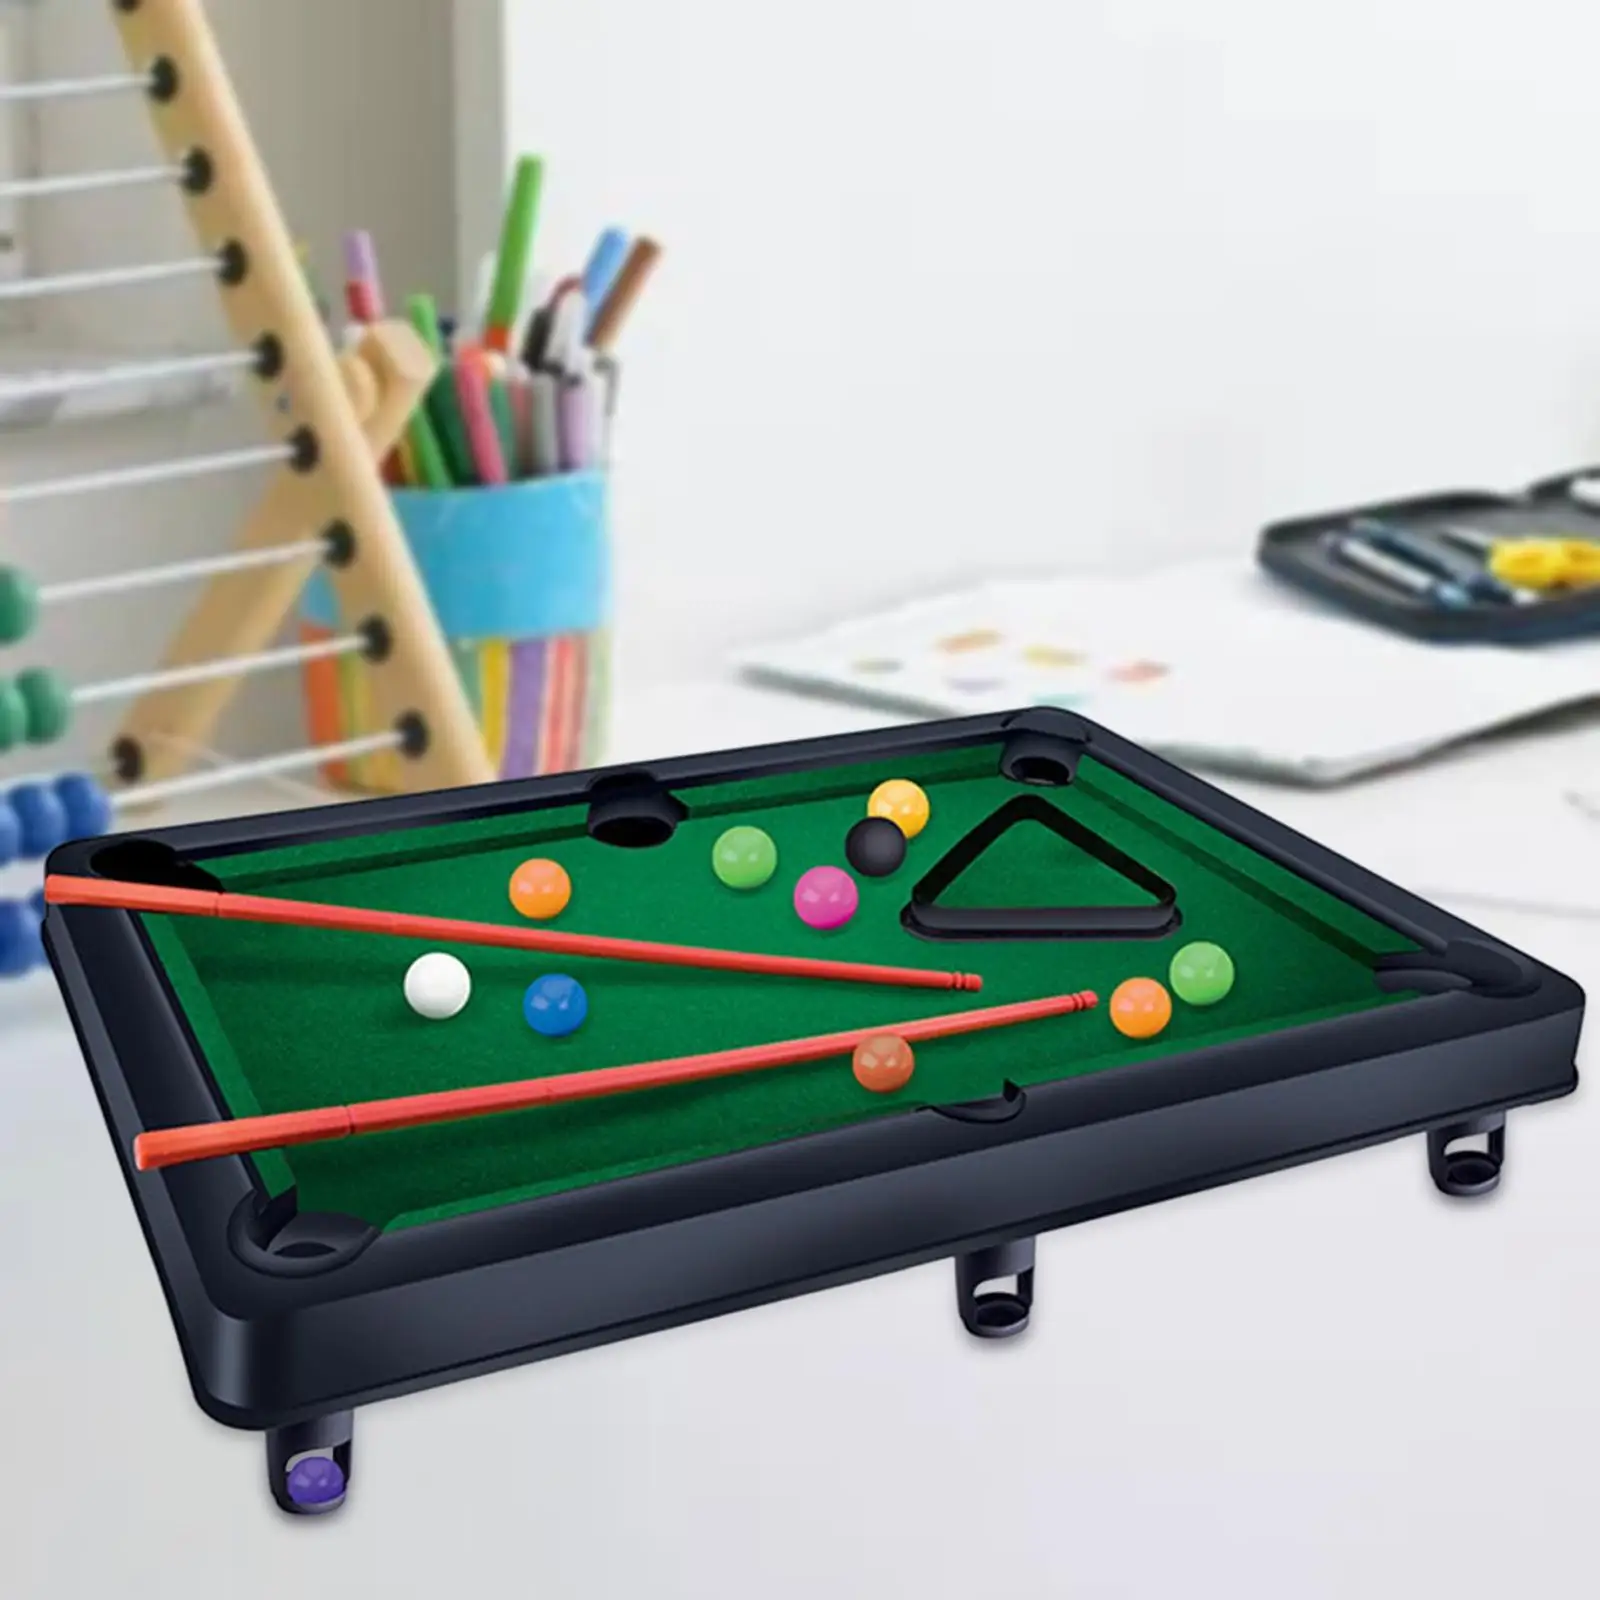 Portable Mini Tabletop Pool Set Billiards Game Playset with Game Balls for Playroom Desk Game Room Office Indoor